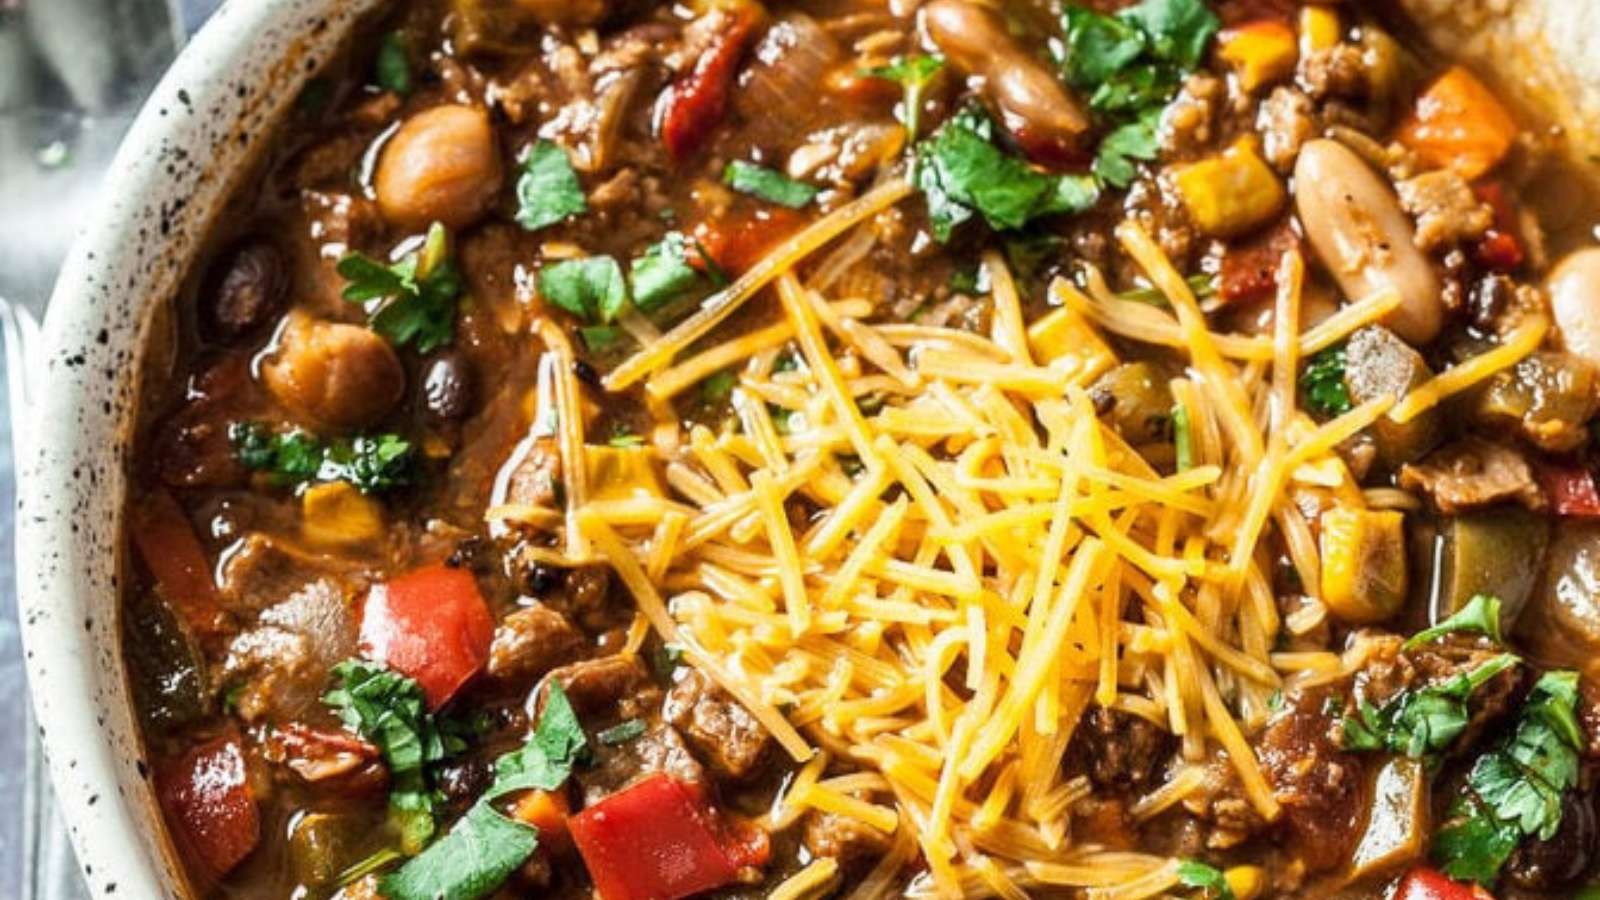 A bowl of chili with cheese and vegetables.